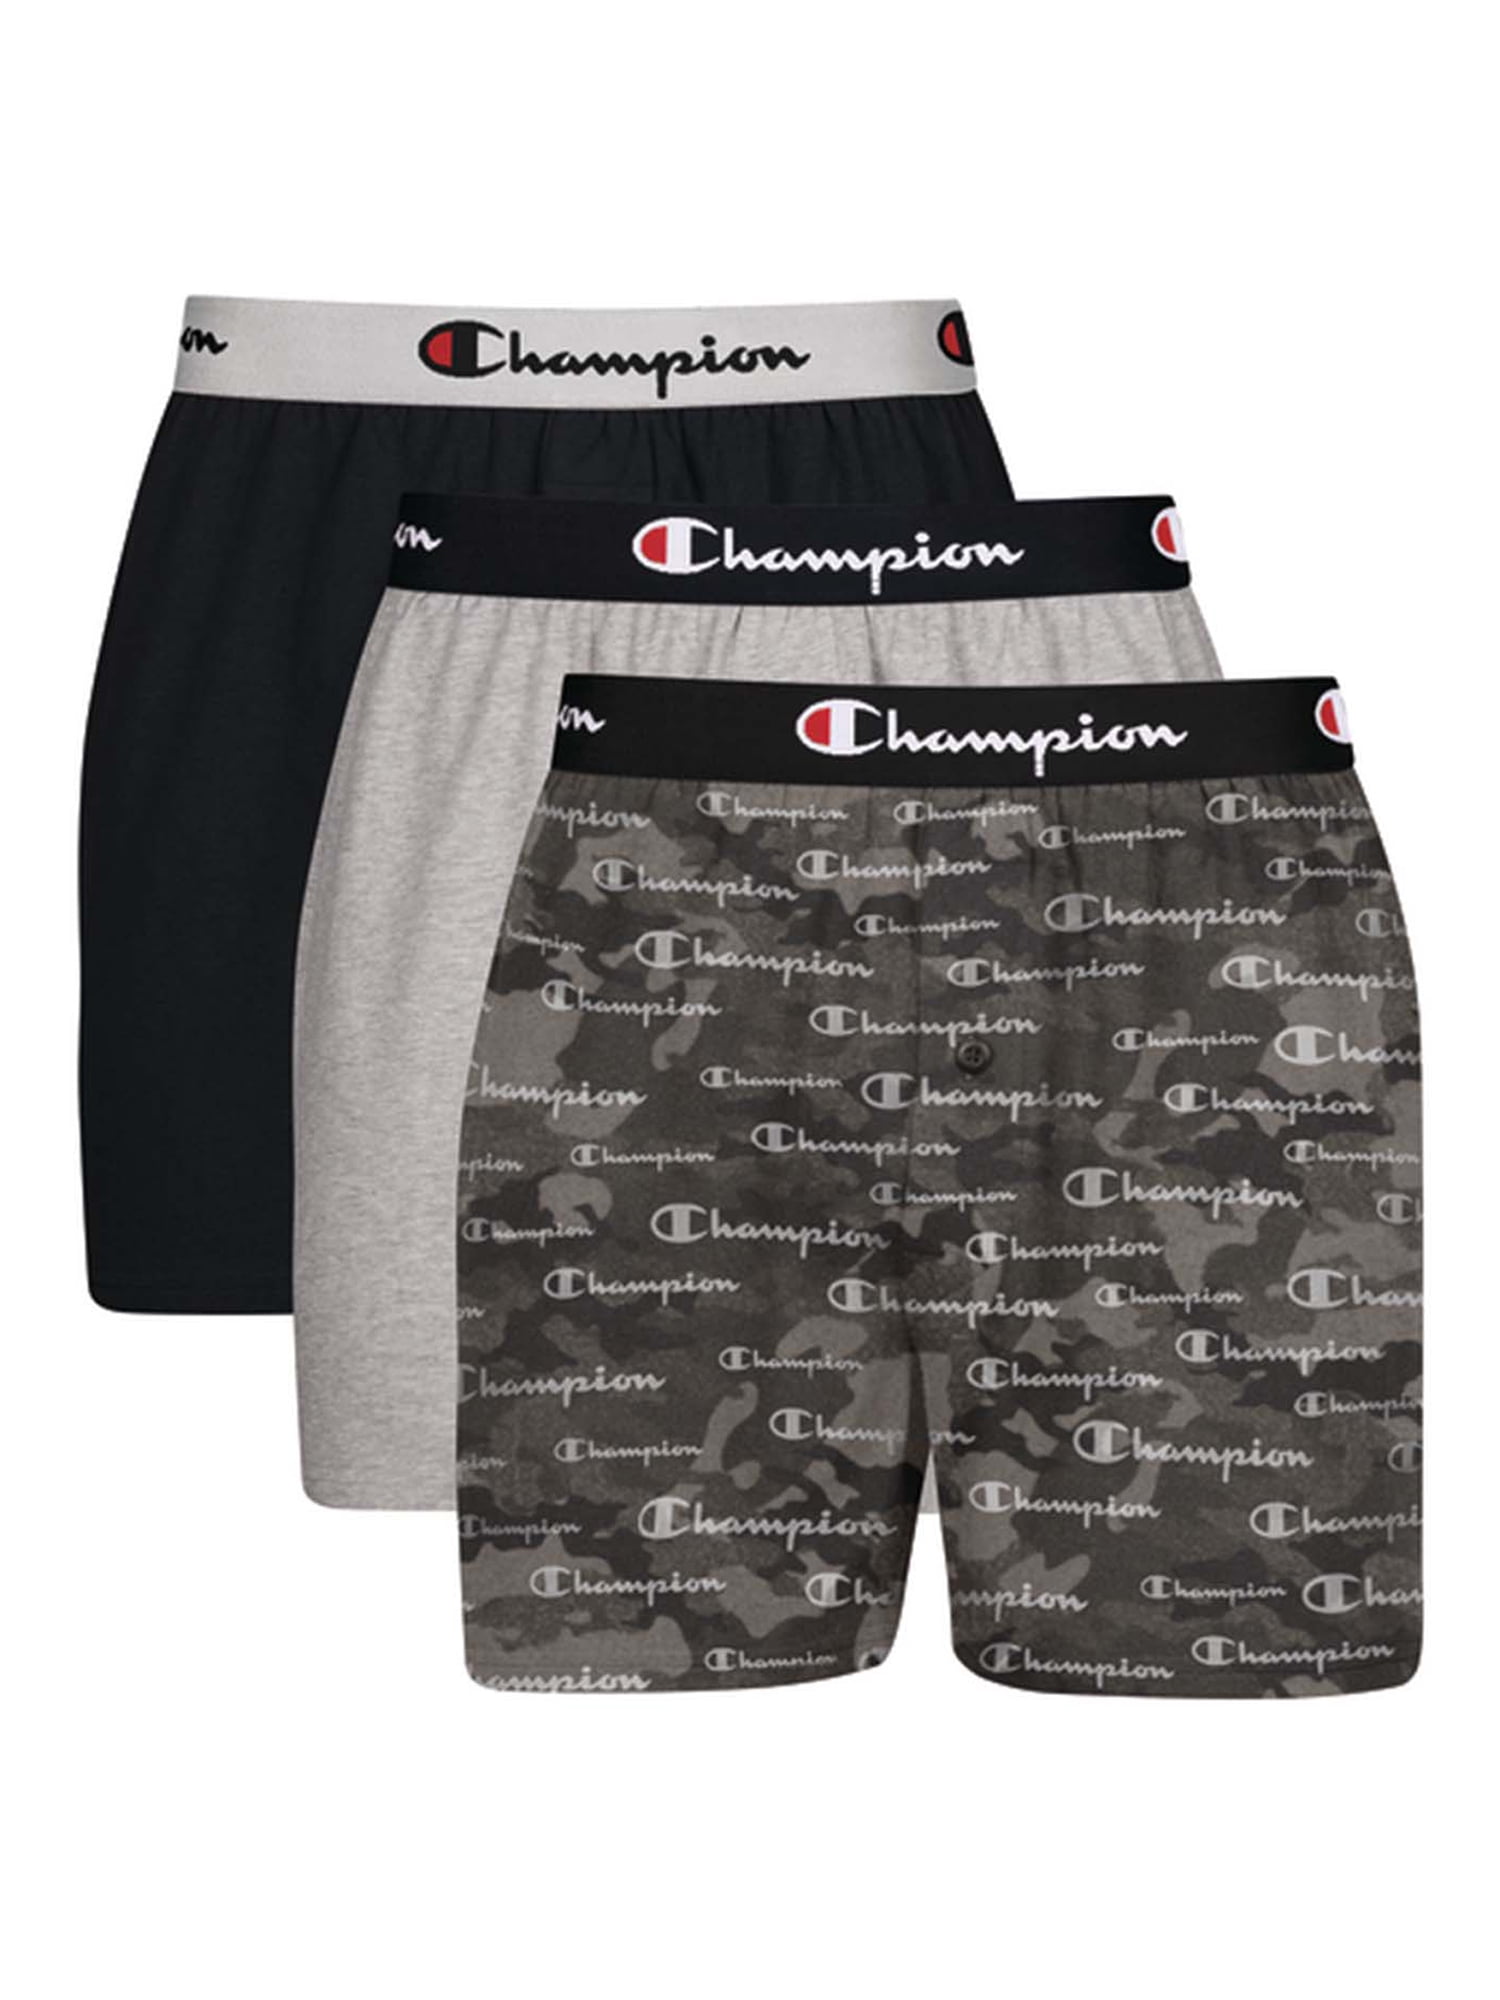 3 pack XL Champion Active Fit Knit Boxers 